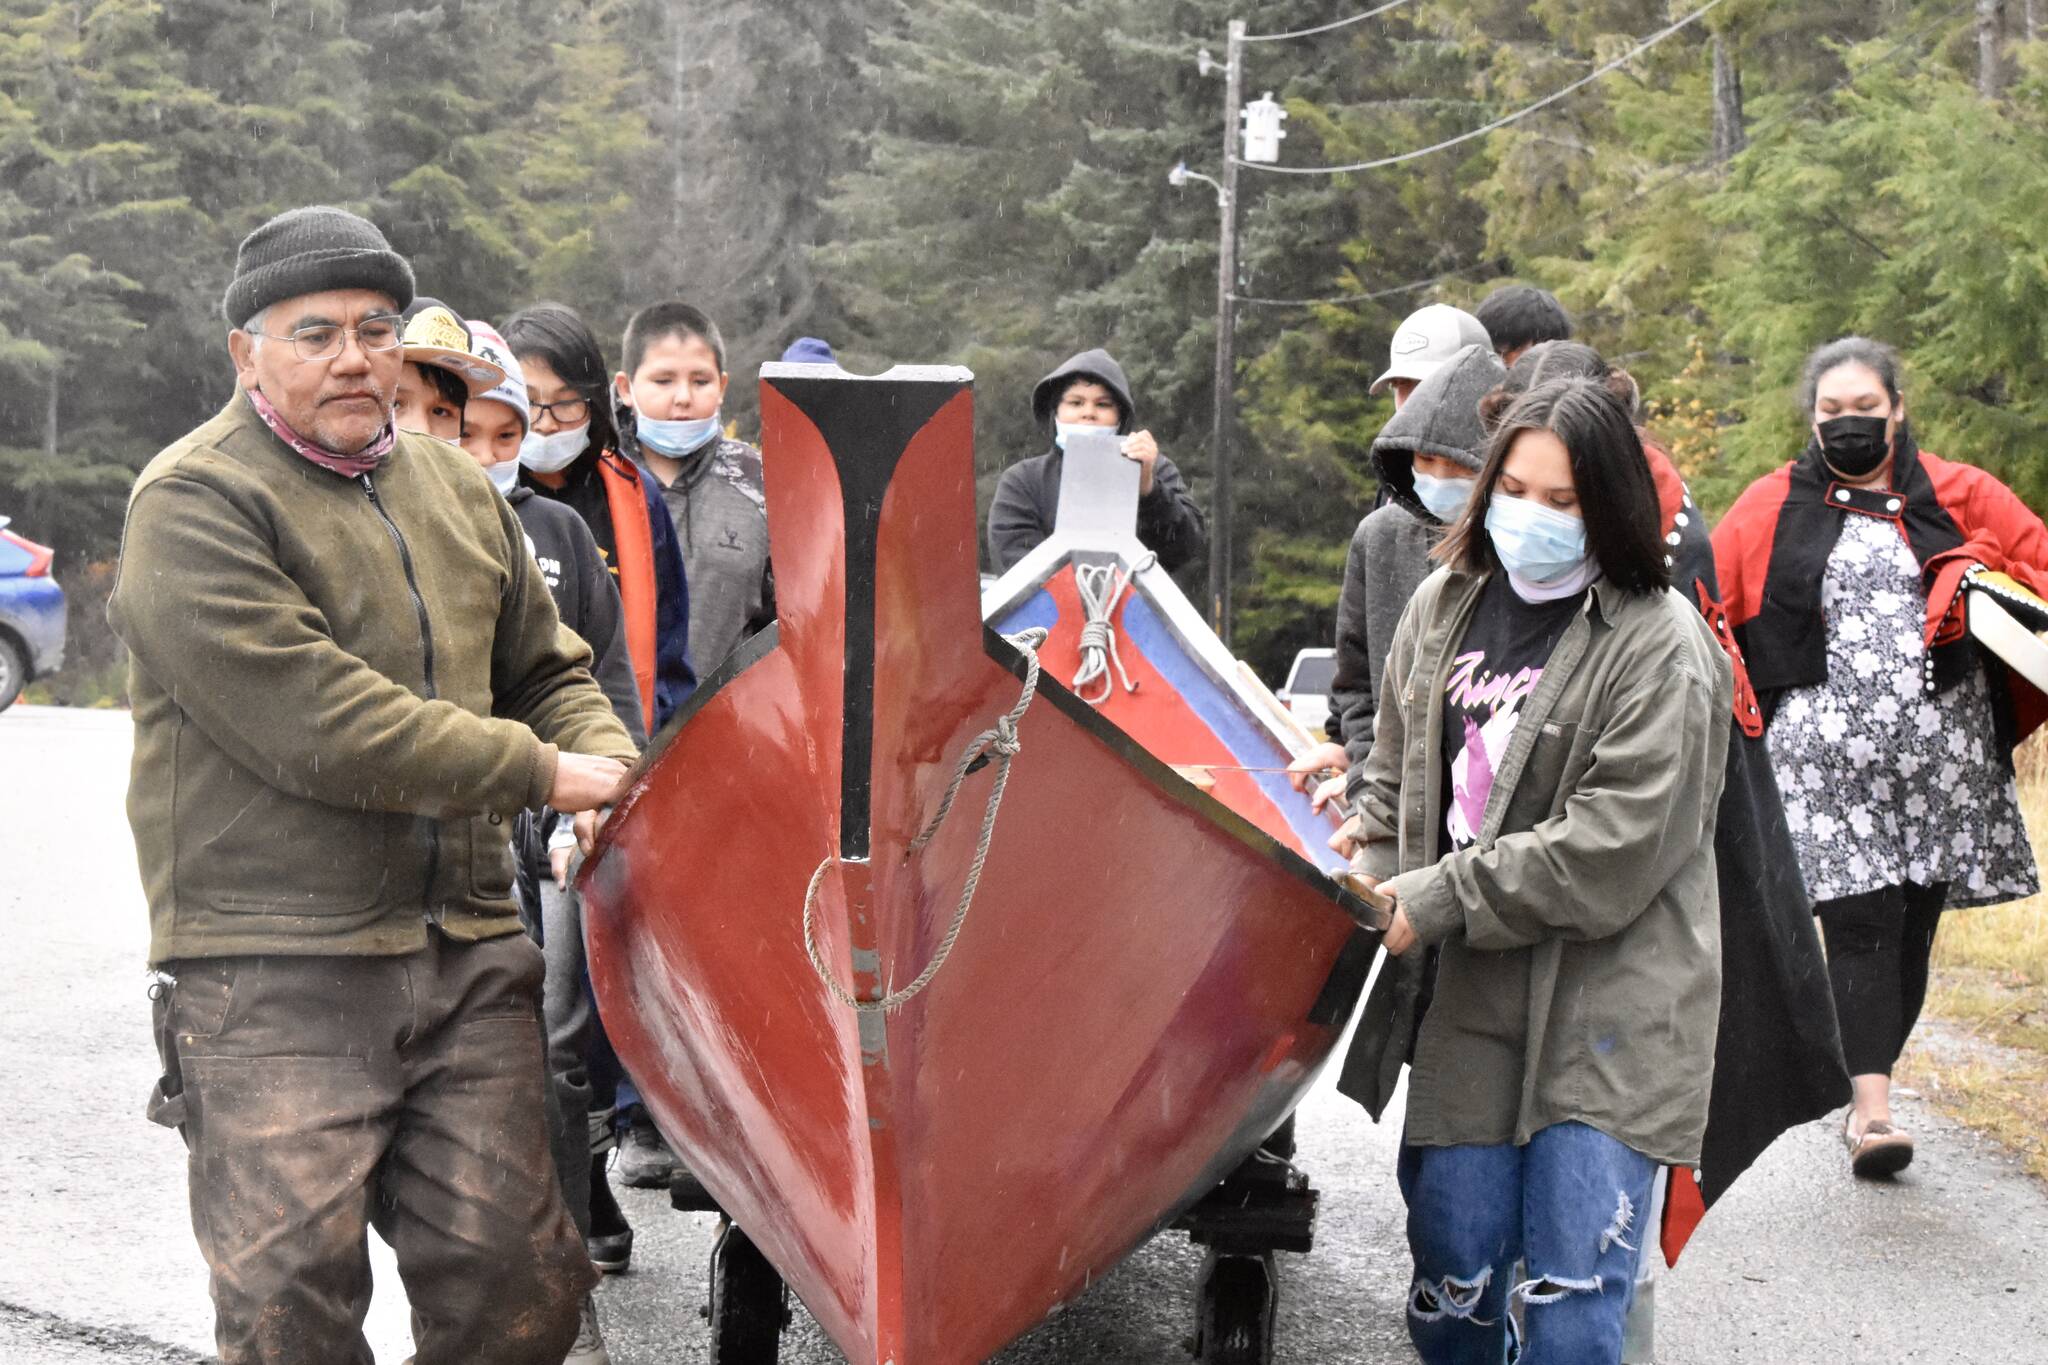 Tlingit master carver Wayne Price, left, and students from Angoon High School wheel a dugout canoe down to the Angoon waterfront on Tuesday, Oct. 26, 2021, for a ceremony commemorating the bombardment of the village by the U.S. Navy in 1882. Dugout canoes were specifically targeted by the navy for destruction, and Price said crafting a new one was a way of healing from the past. (Peter Segall / Juneau Empire)